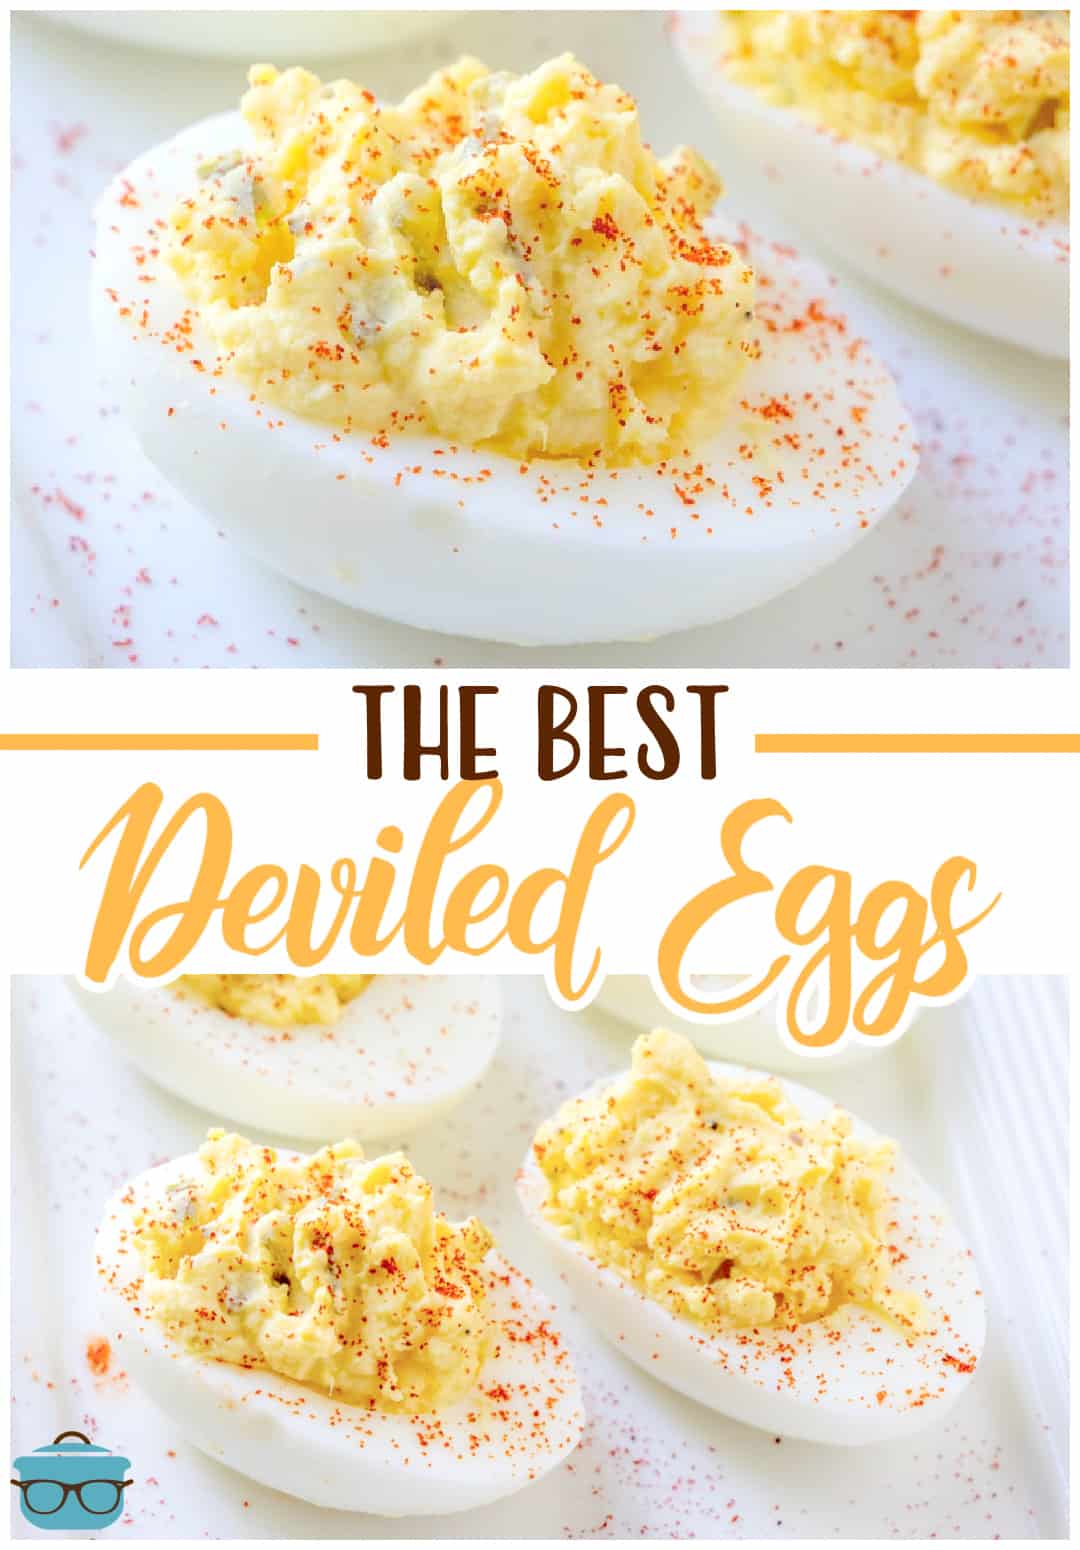 A collage of two photos showing deviled eggs on a white platter.